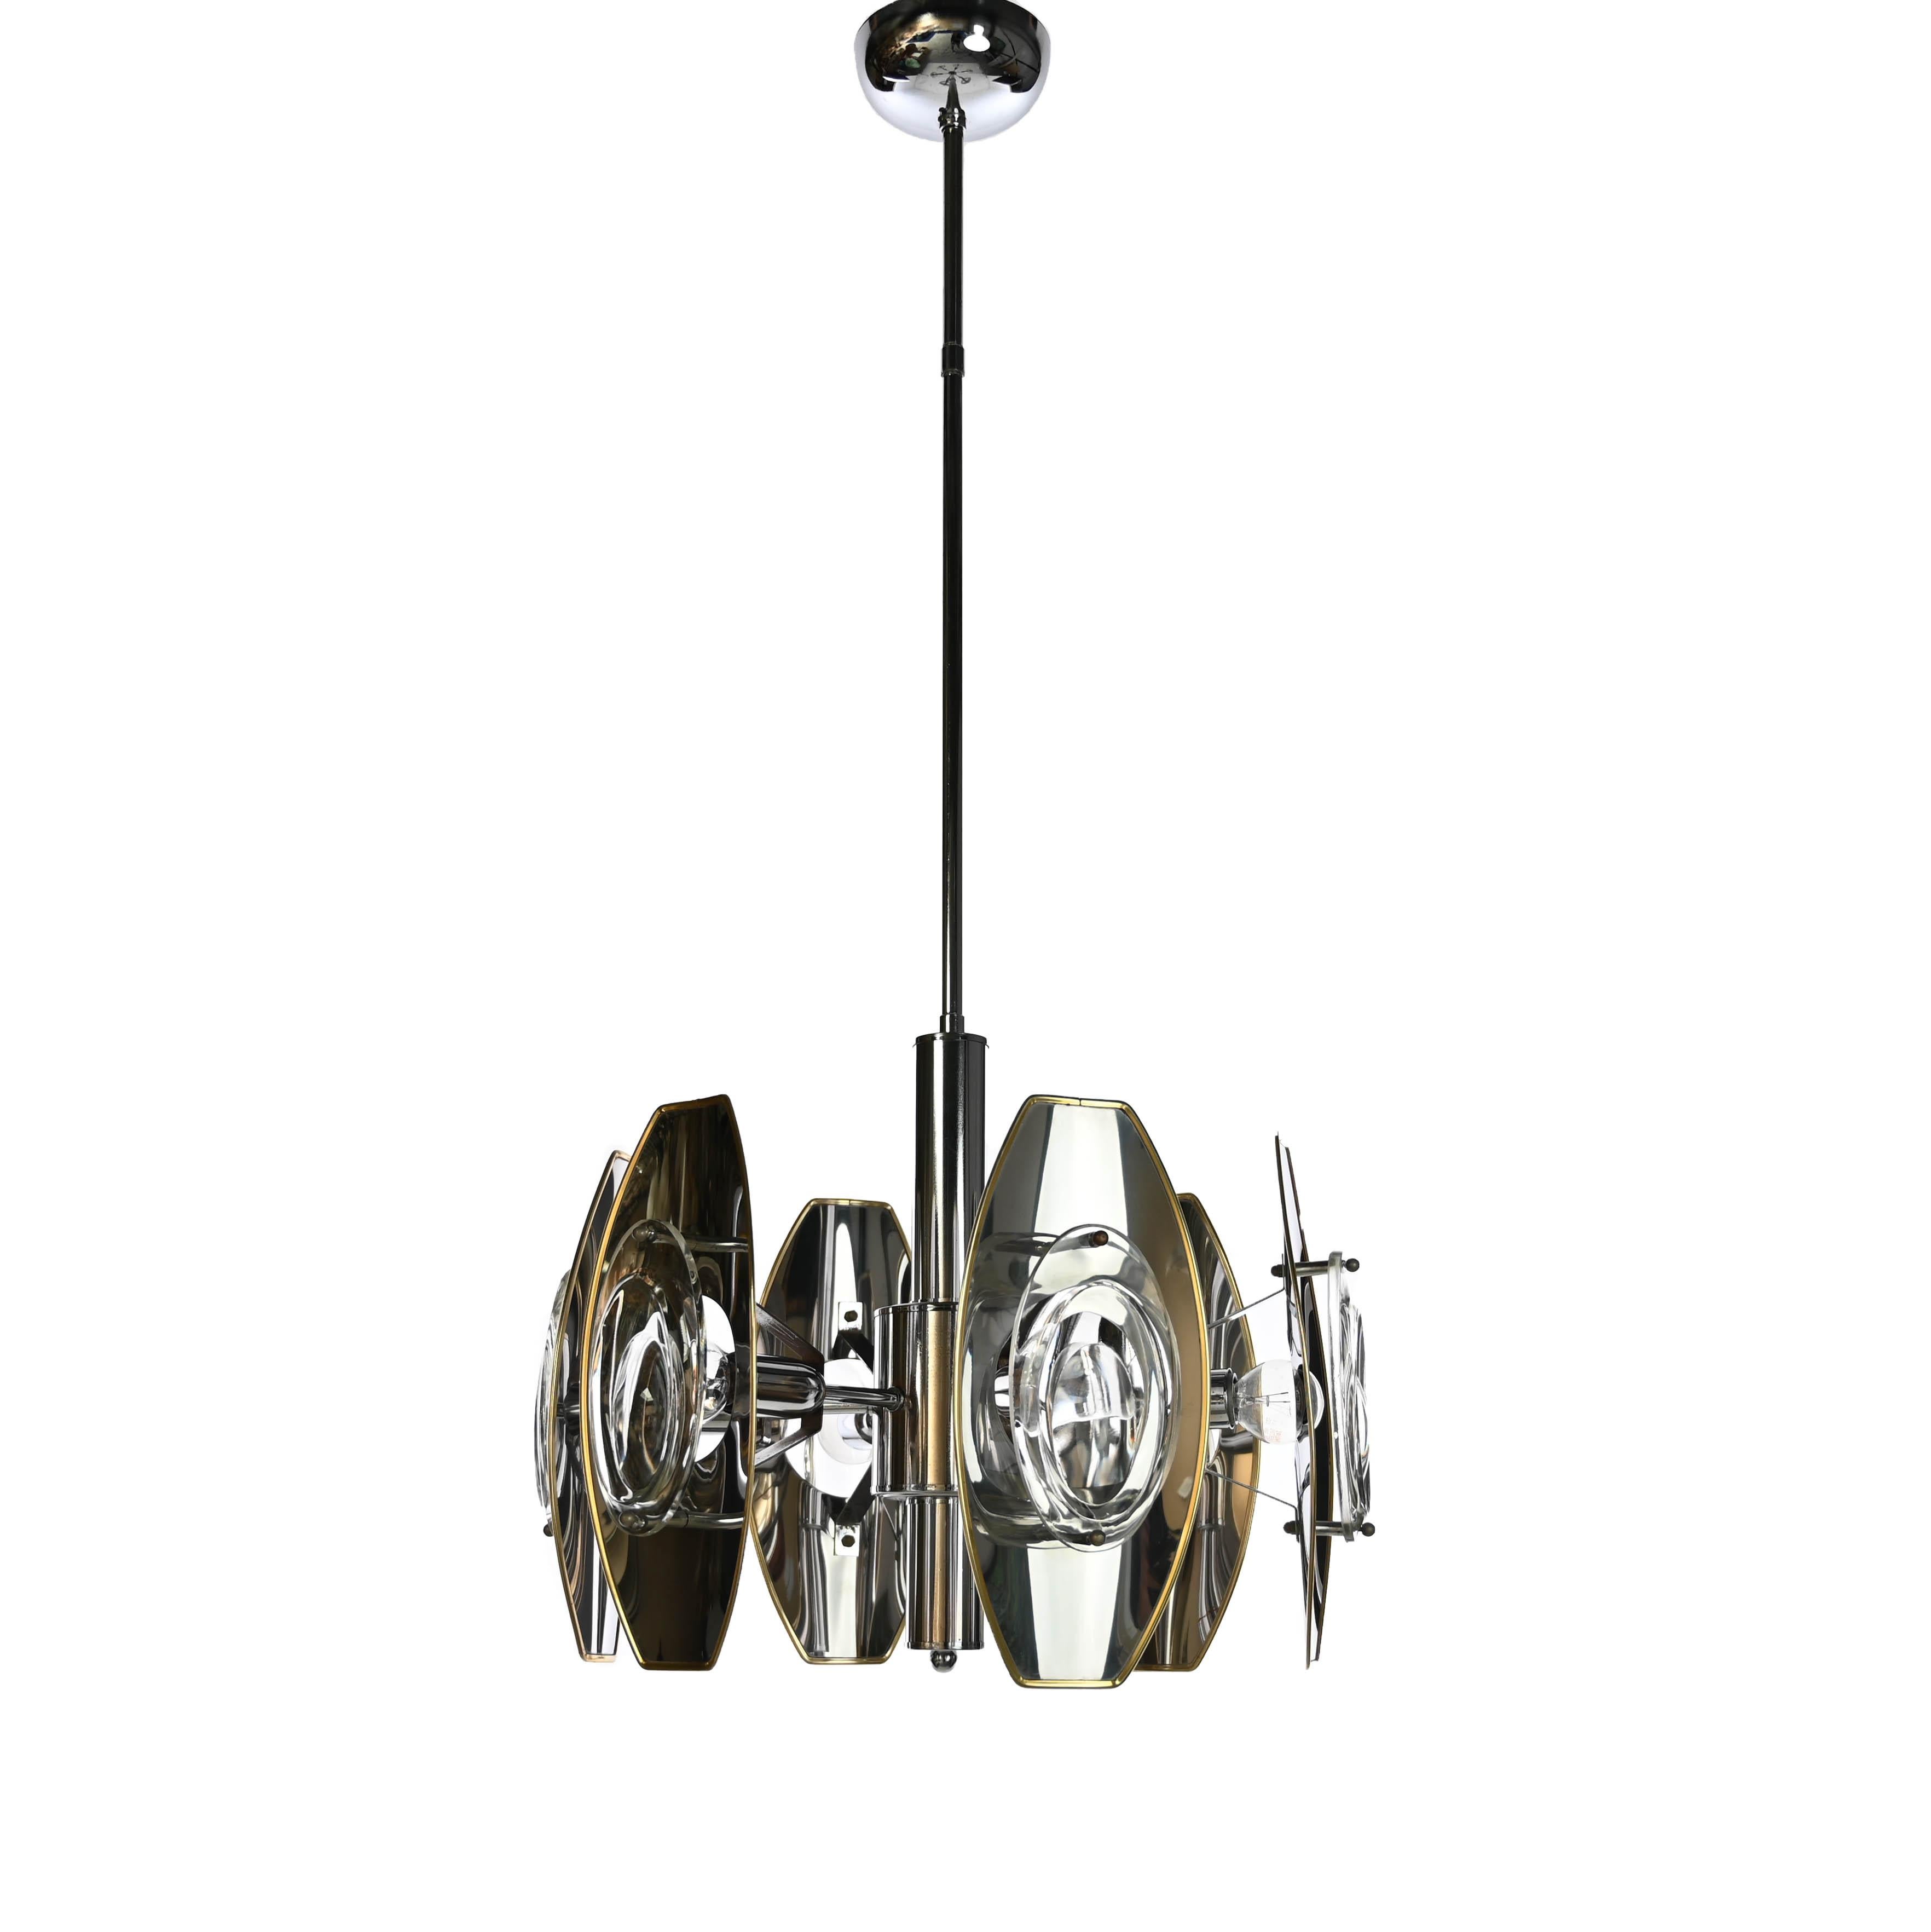 Super stylish and rare metallic lamp by Oscar Torlasco. The 6 chrome armes contain aluminium lamp shades with a gold finish rim which hold 6 large lenses of glass.